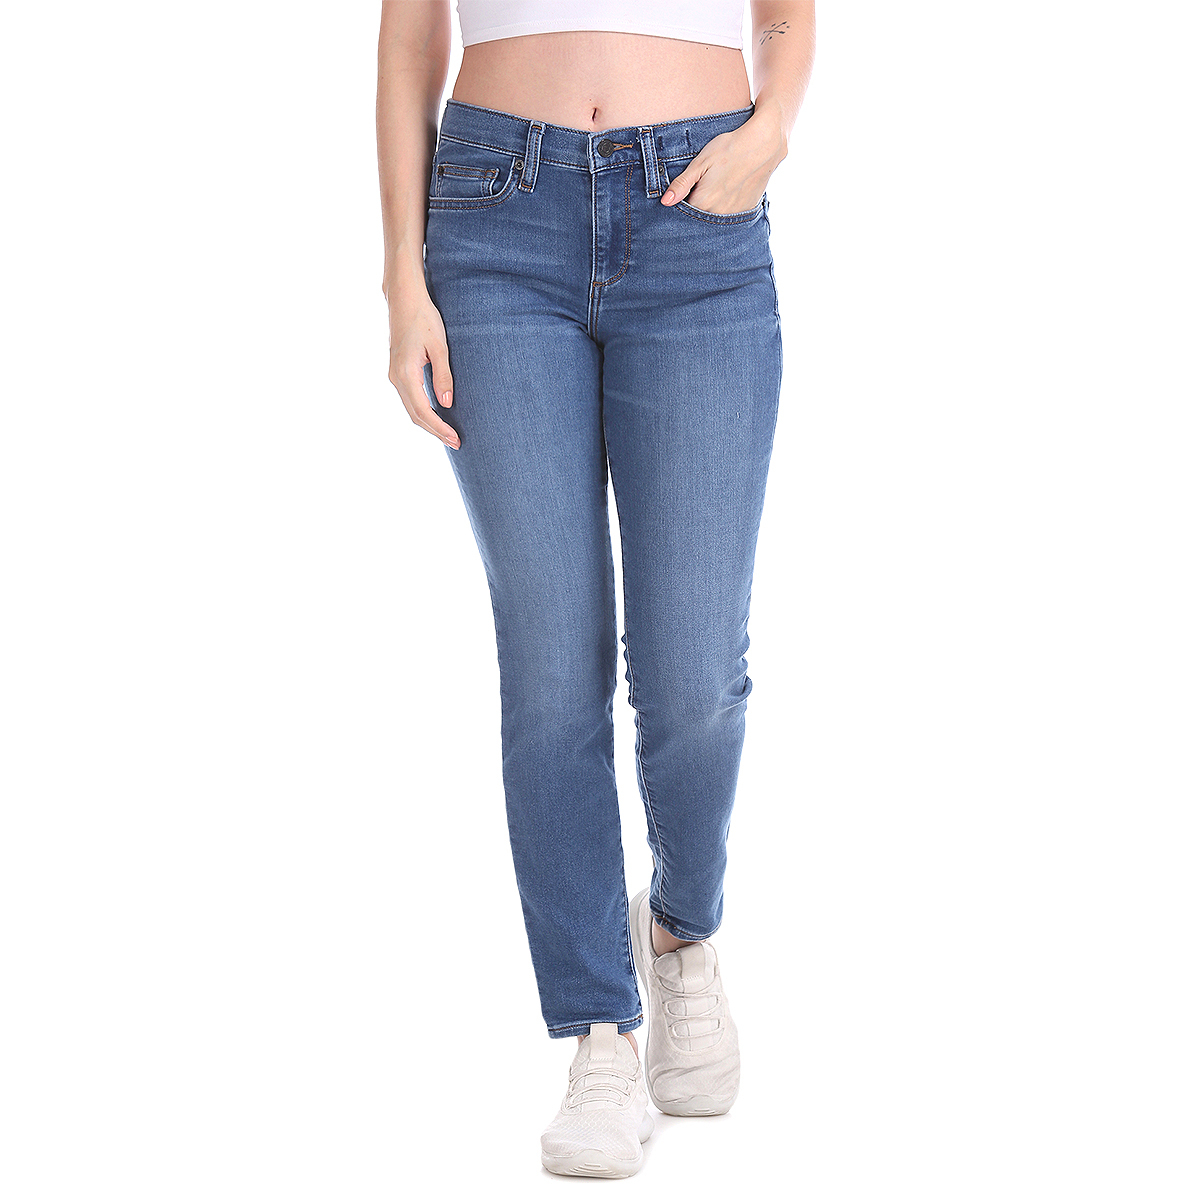 Gap Mid Rise Skinny Fit Full Length Stone Washed And Whiskered Jeans - Blue, Size-26